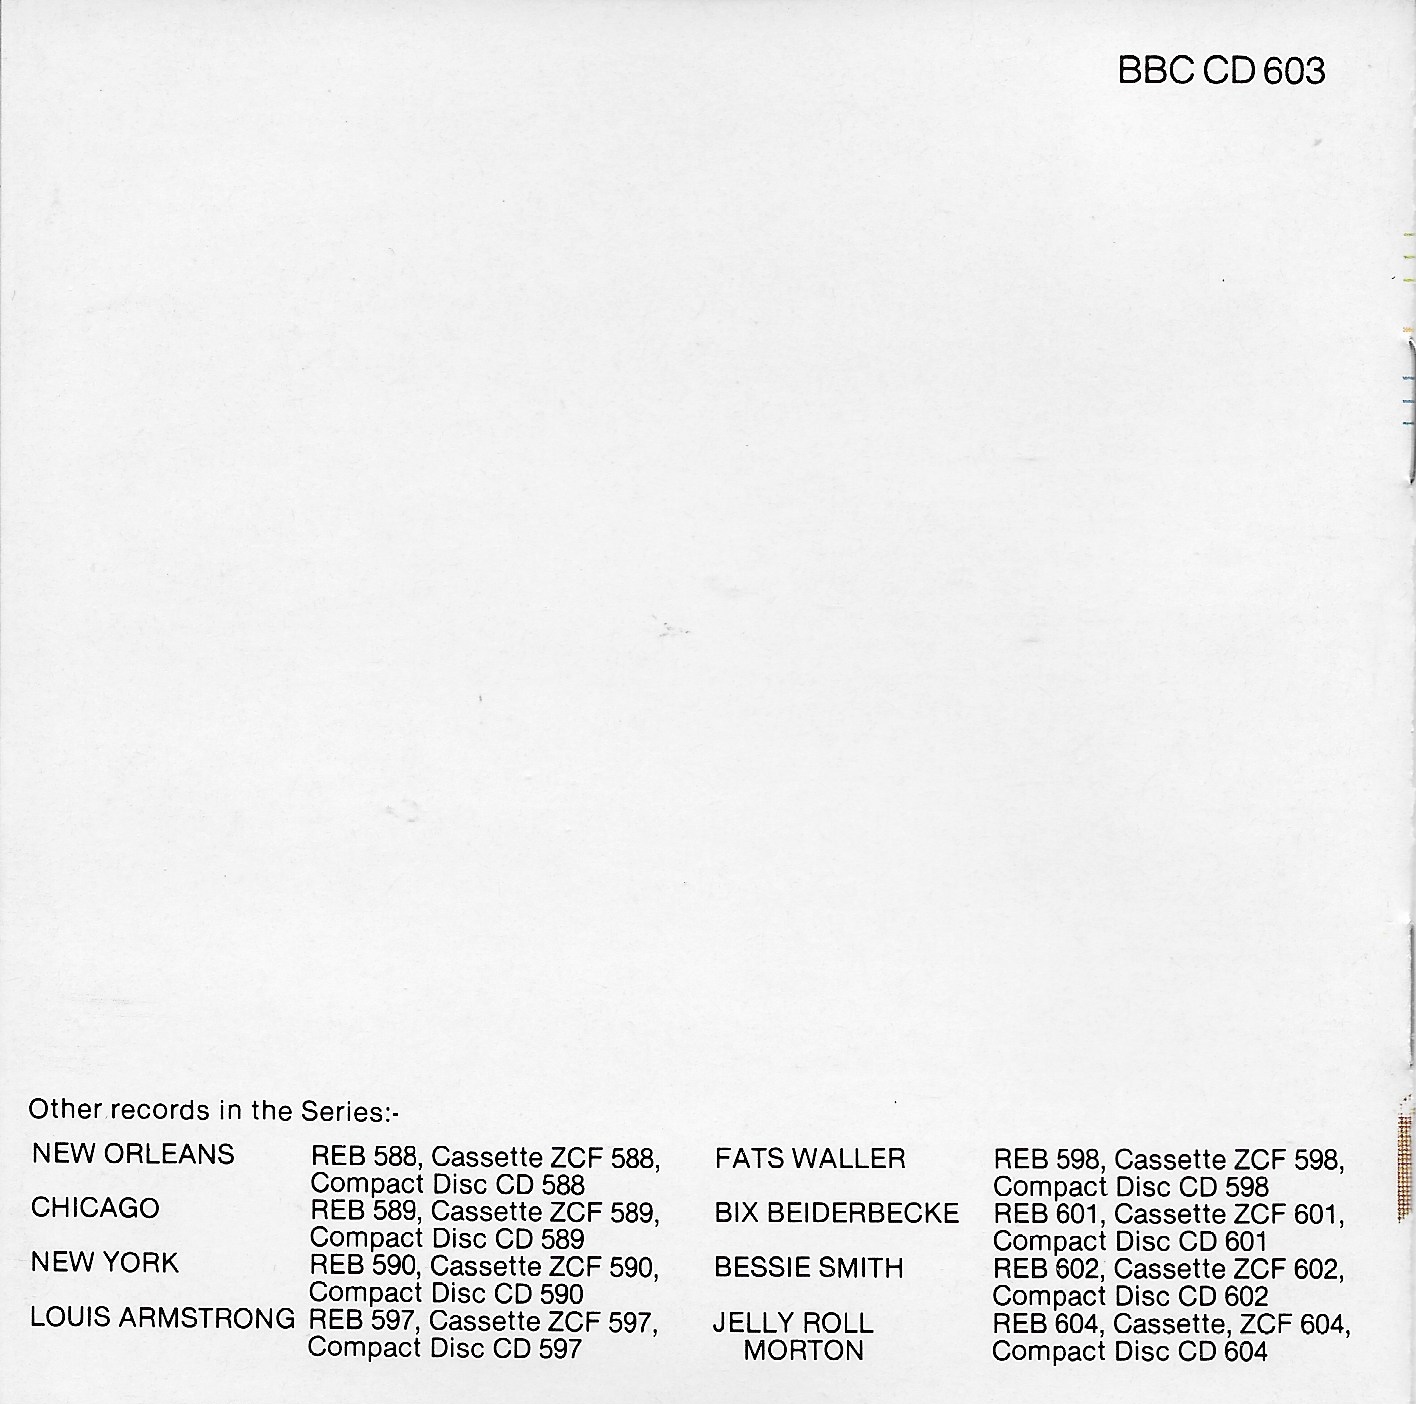 Middle of cover of BBCCD603